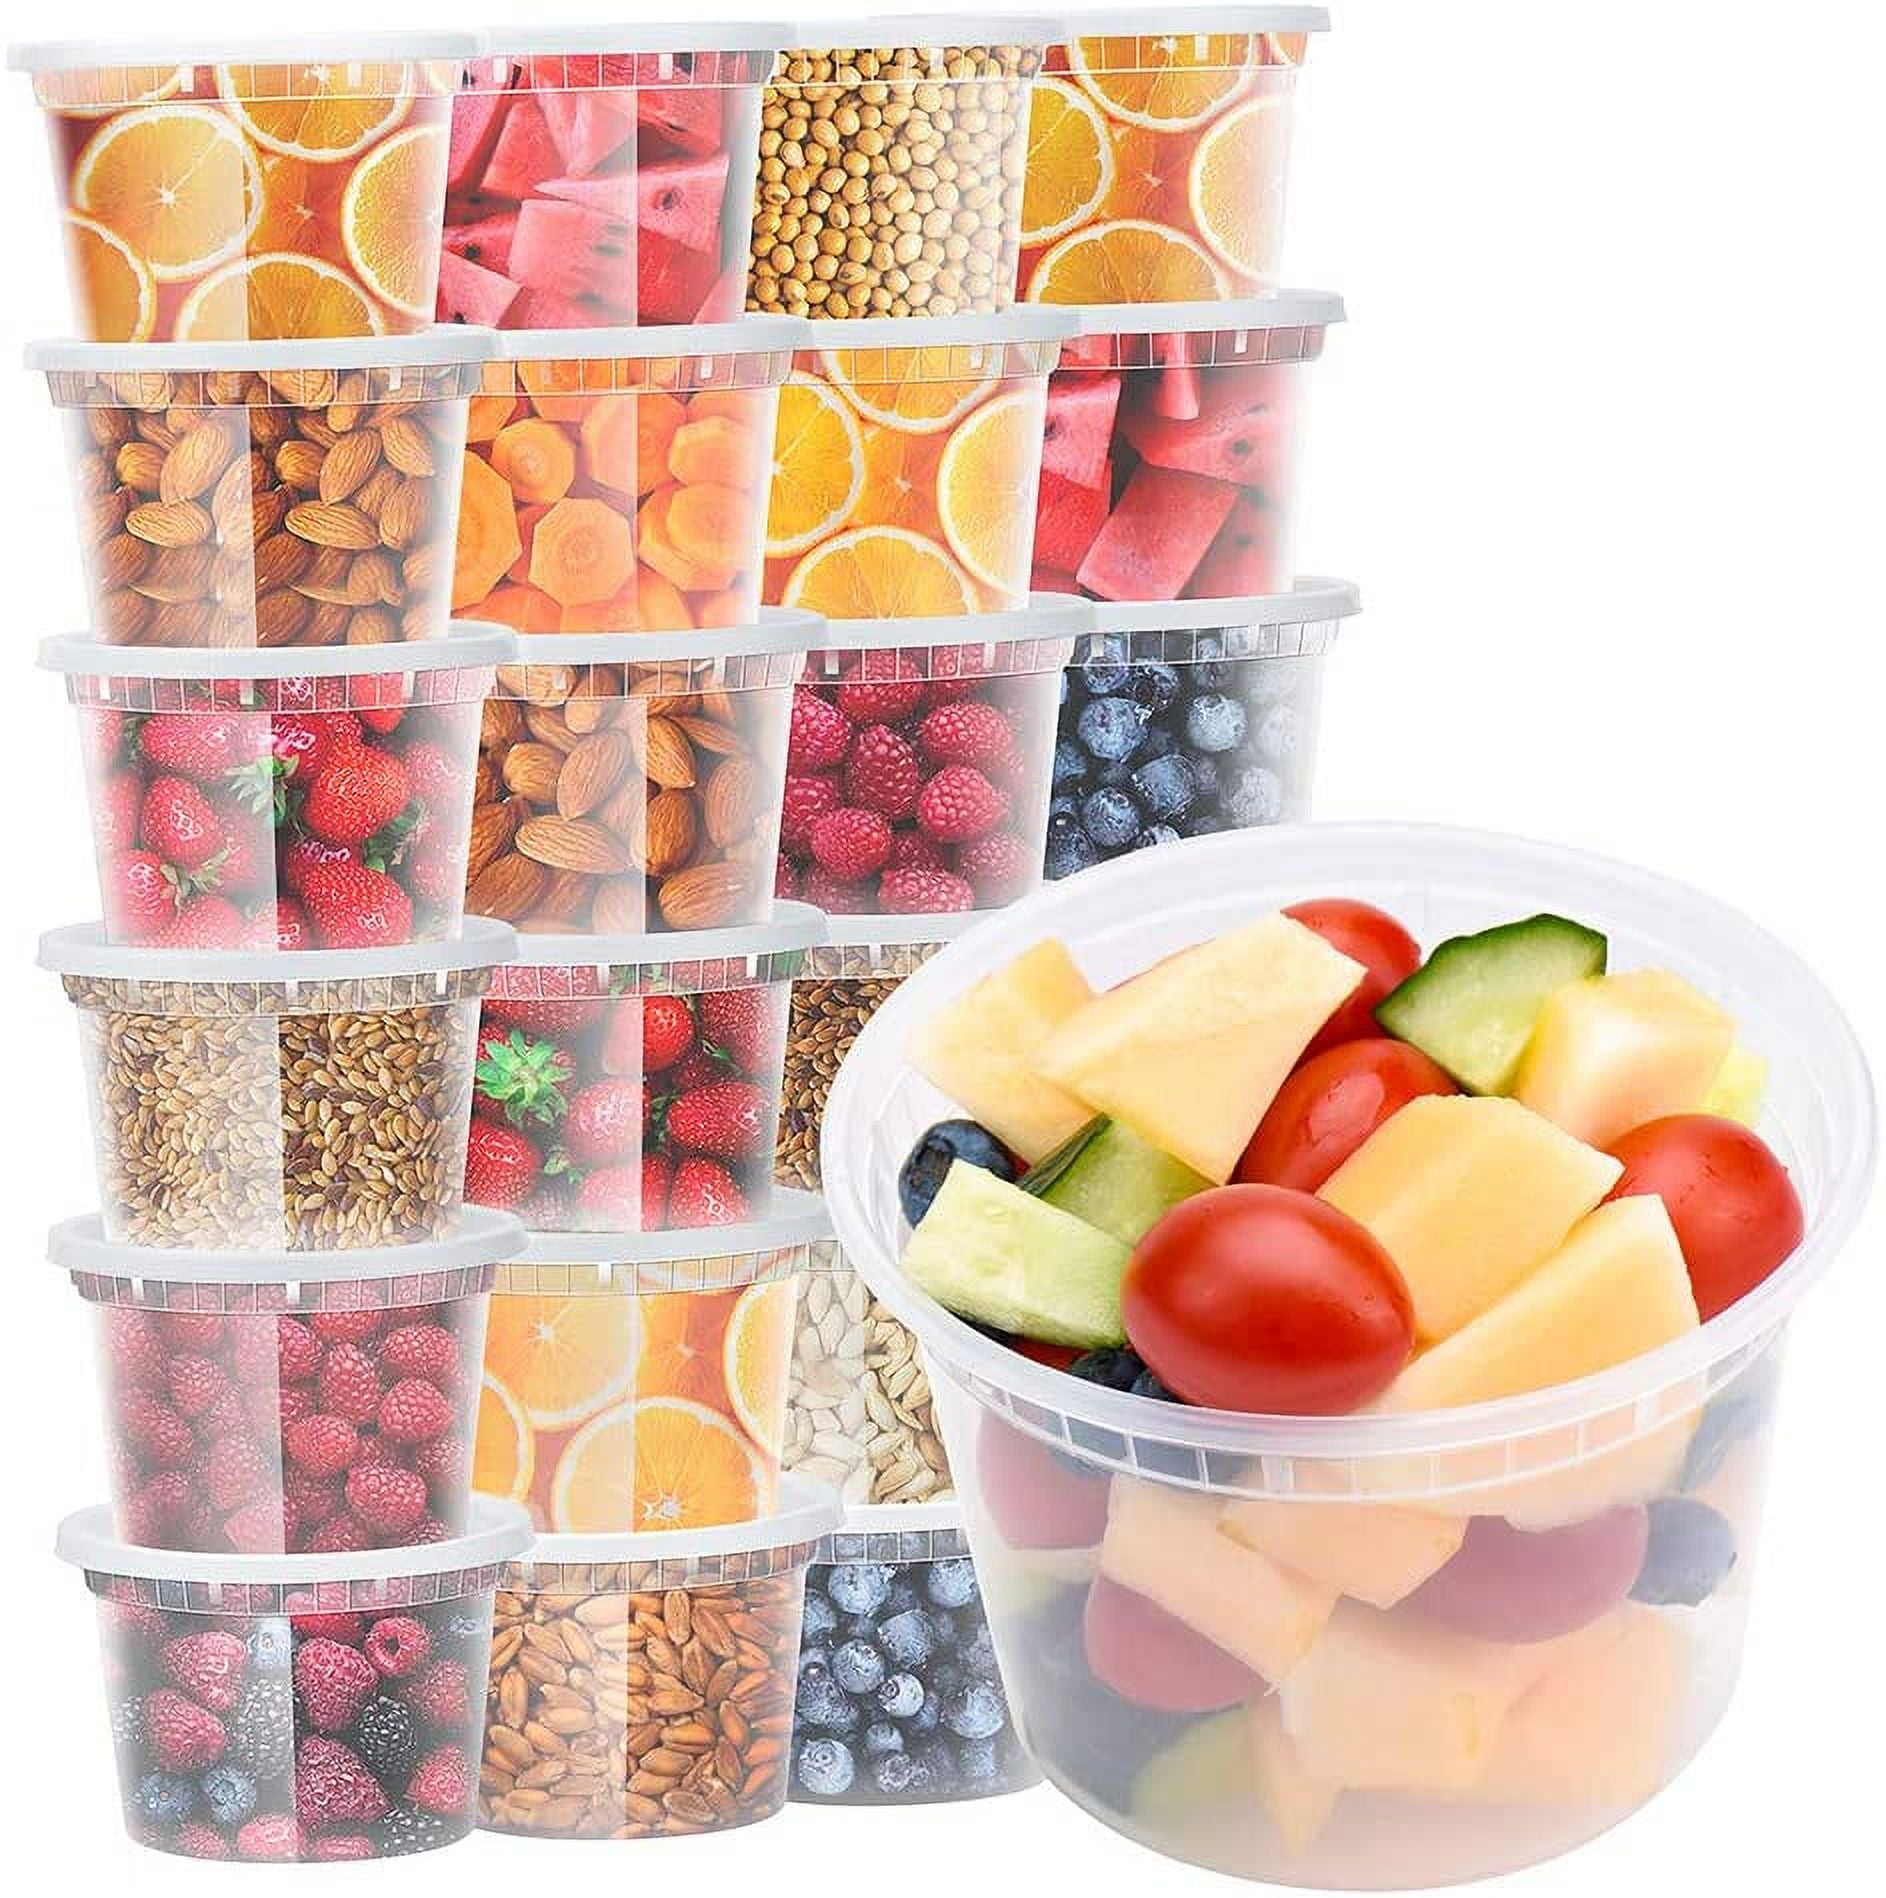 Glotoch 48 Pack 16 oz. (2 Cups) Plastic Food and Drink Storage Containers  Set with Lids - Microwave, Freezer & Dishwasher Safe Eco-Friendly,  BPA-Free, Reusable …